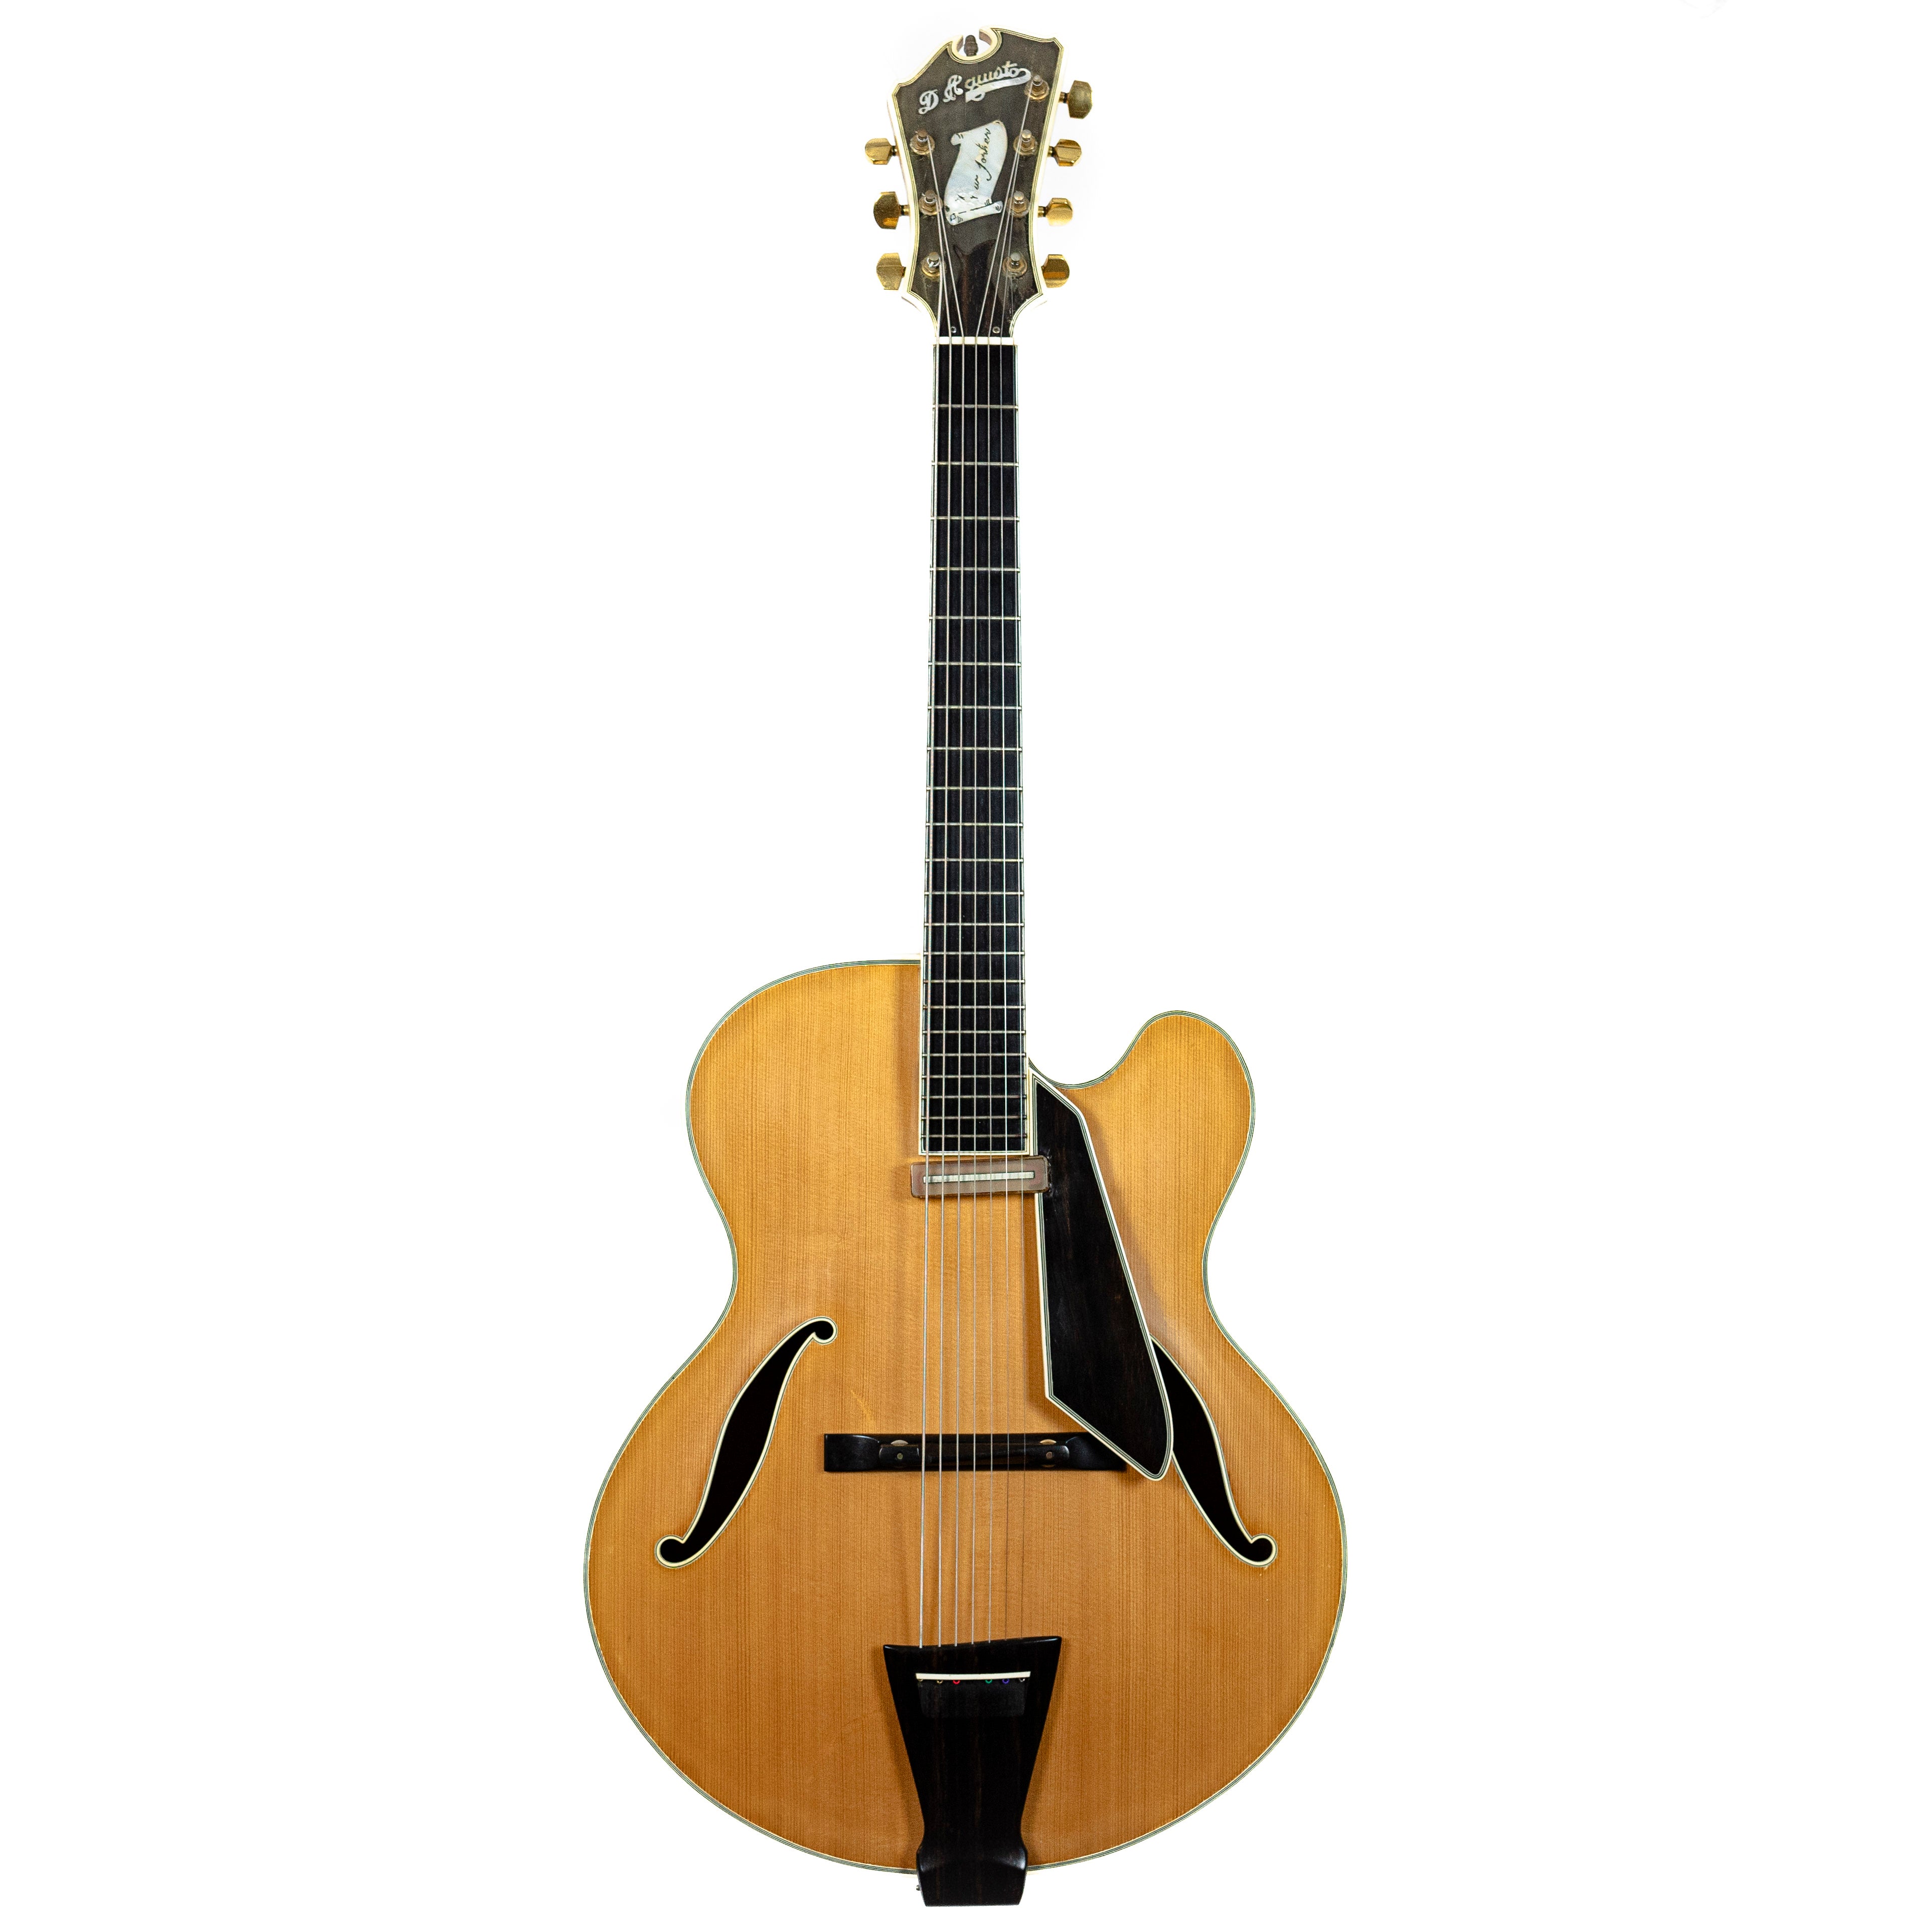 D'Aquisto 1980 New Yorker Deluxe 7-string 18" Archtop #1140